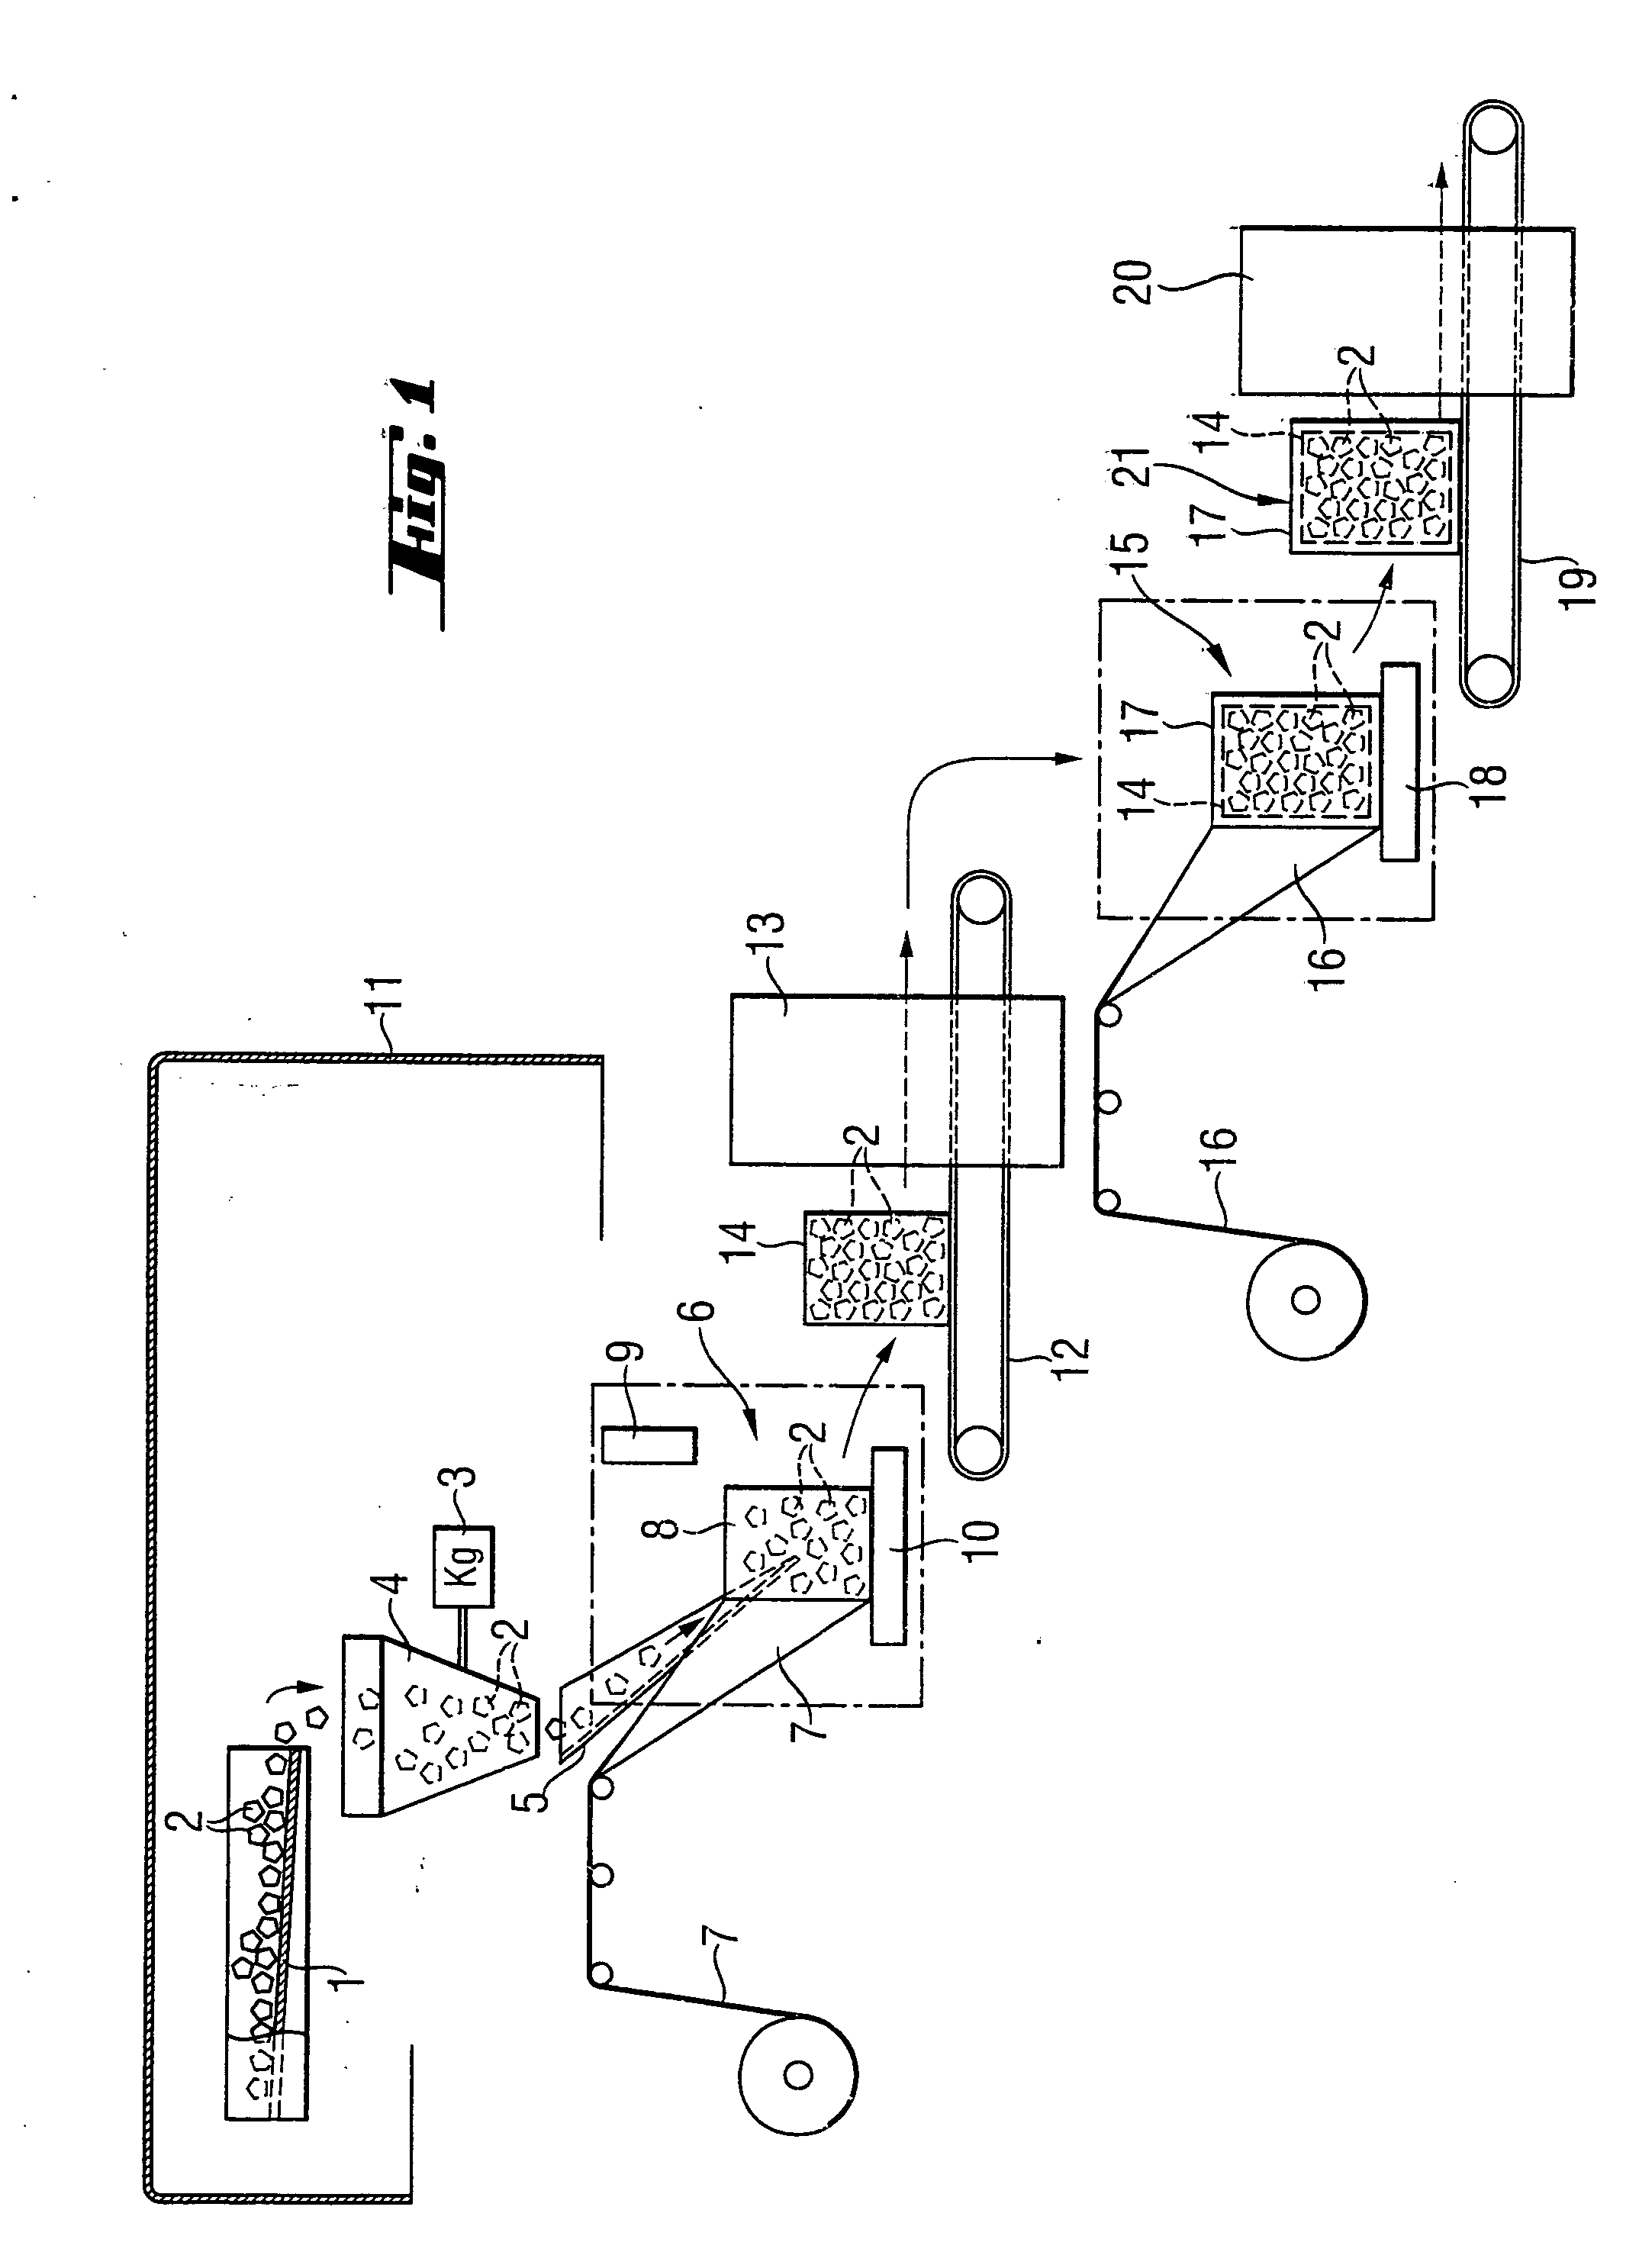 Process and apparatus for the cost-effective packaging of polysilicon fragments